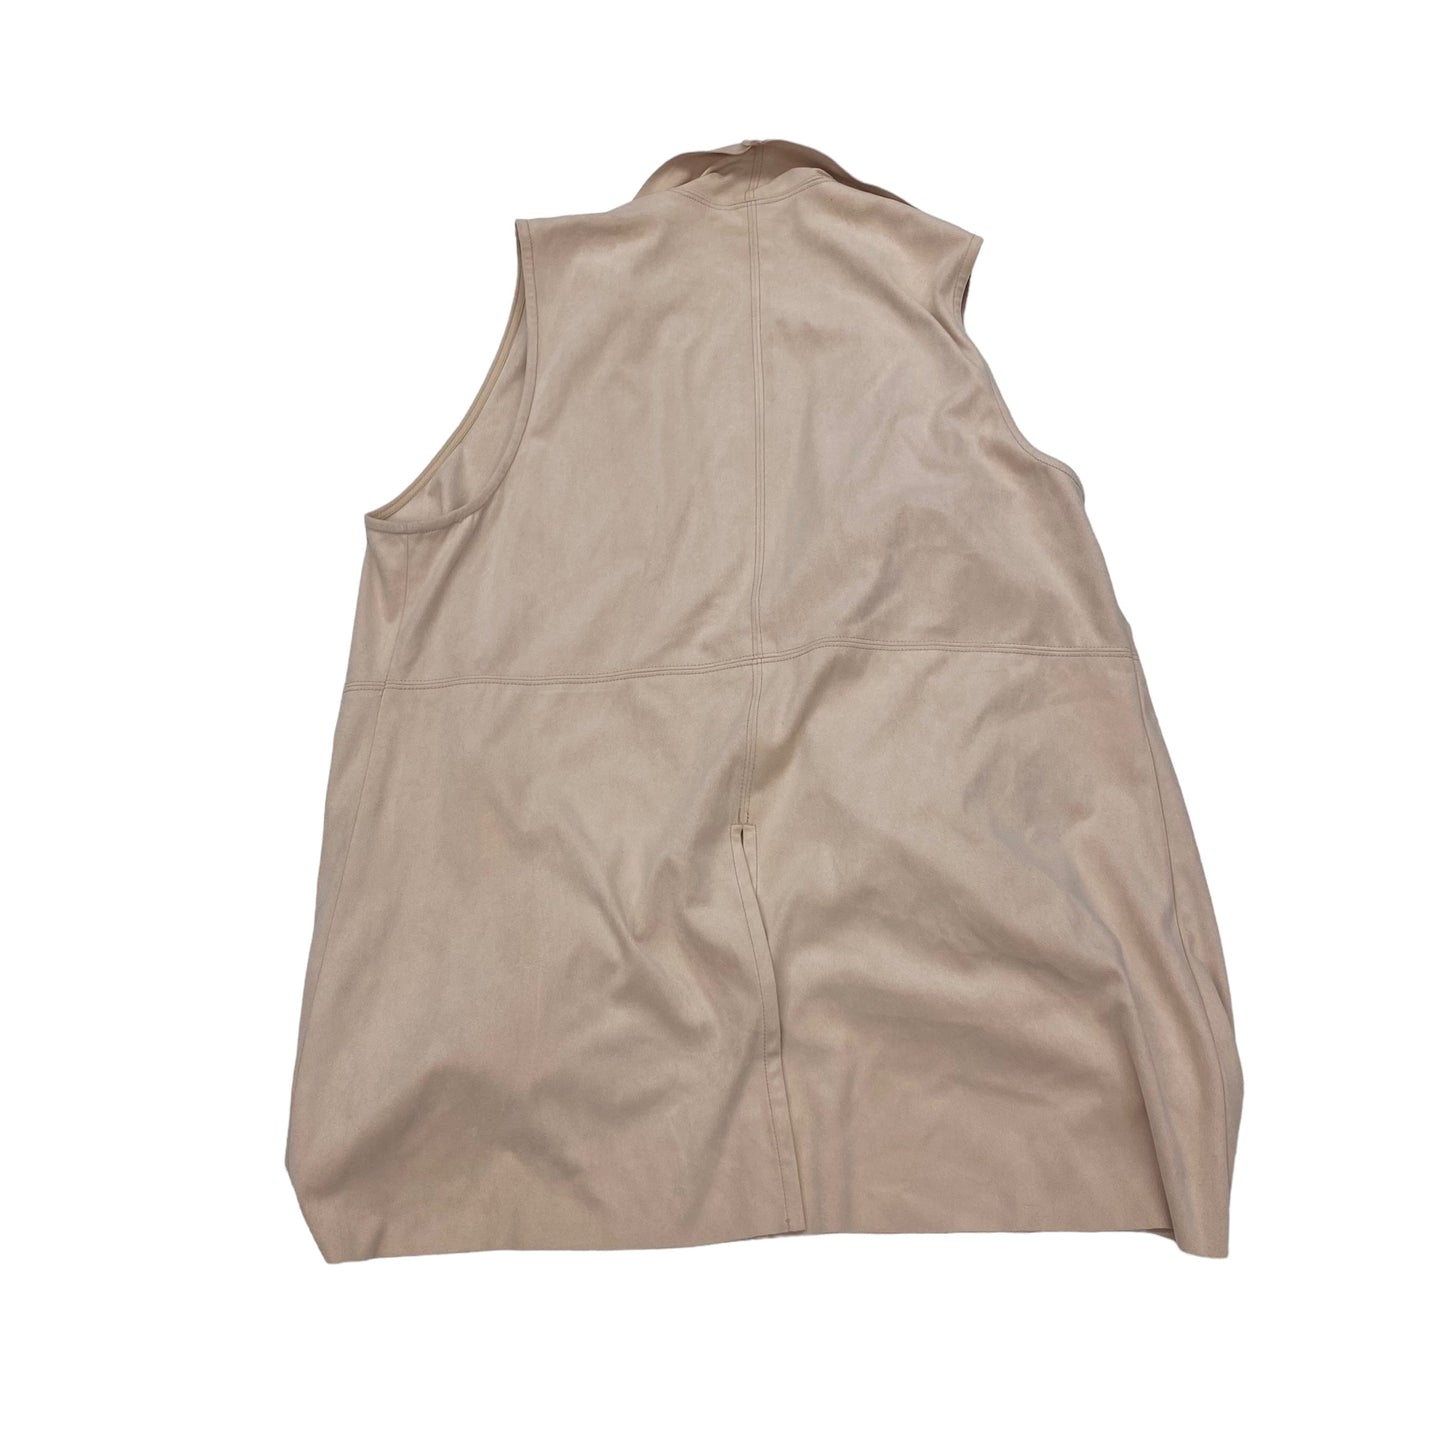 Vest Other By Premise  Size: M